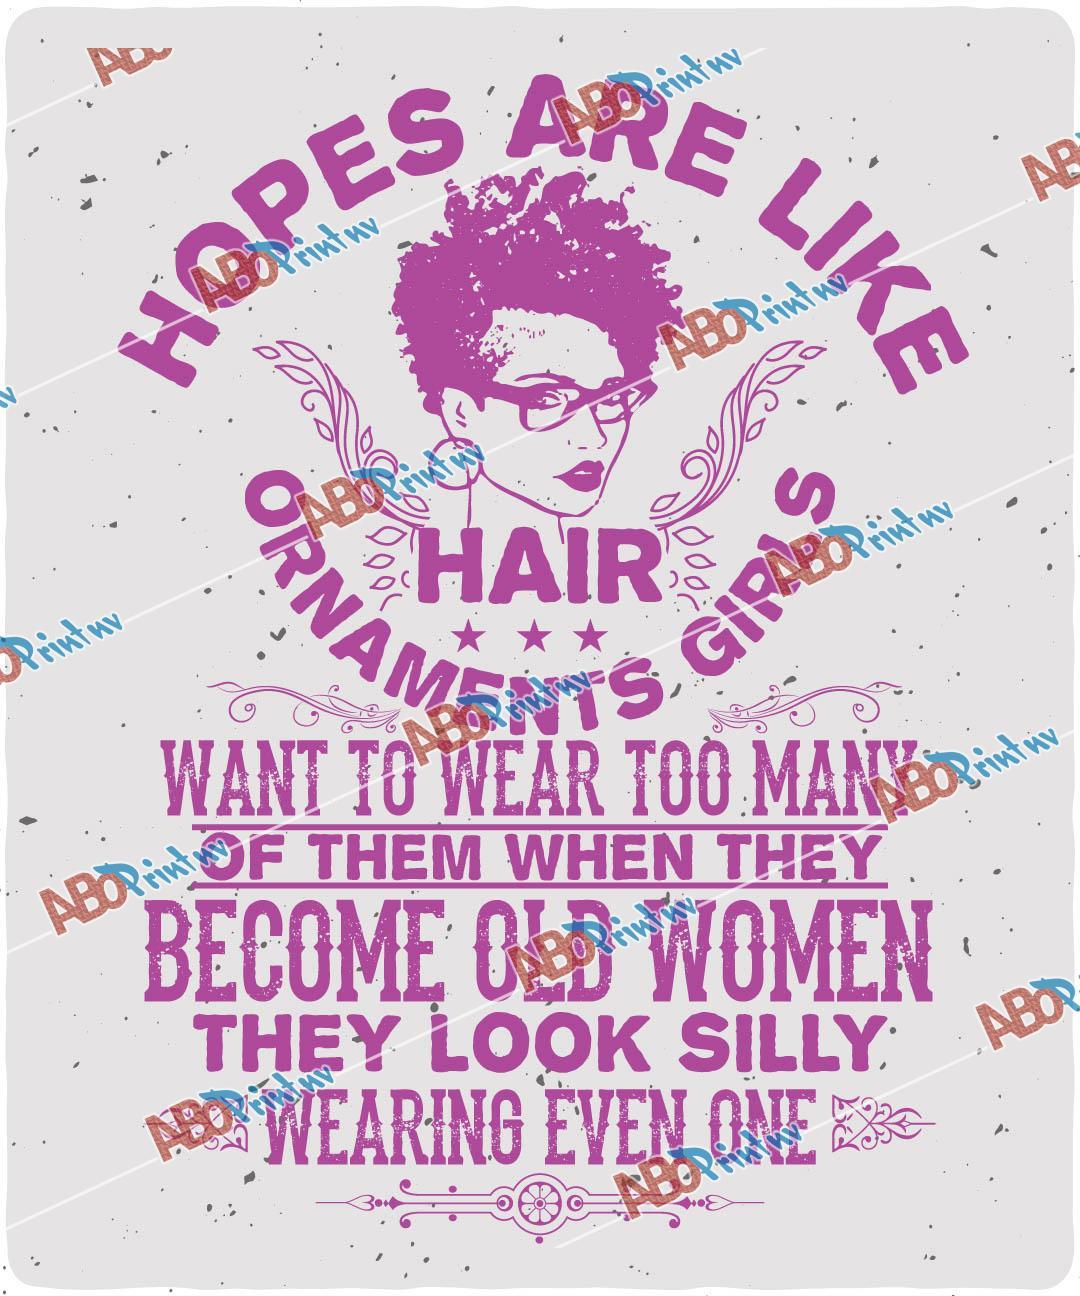 hopes are like hair ornaments girls want to wear too many.jpg